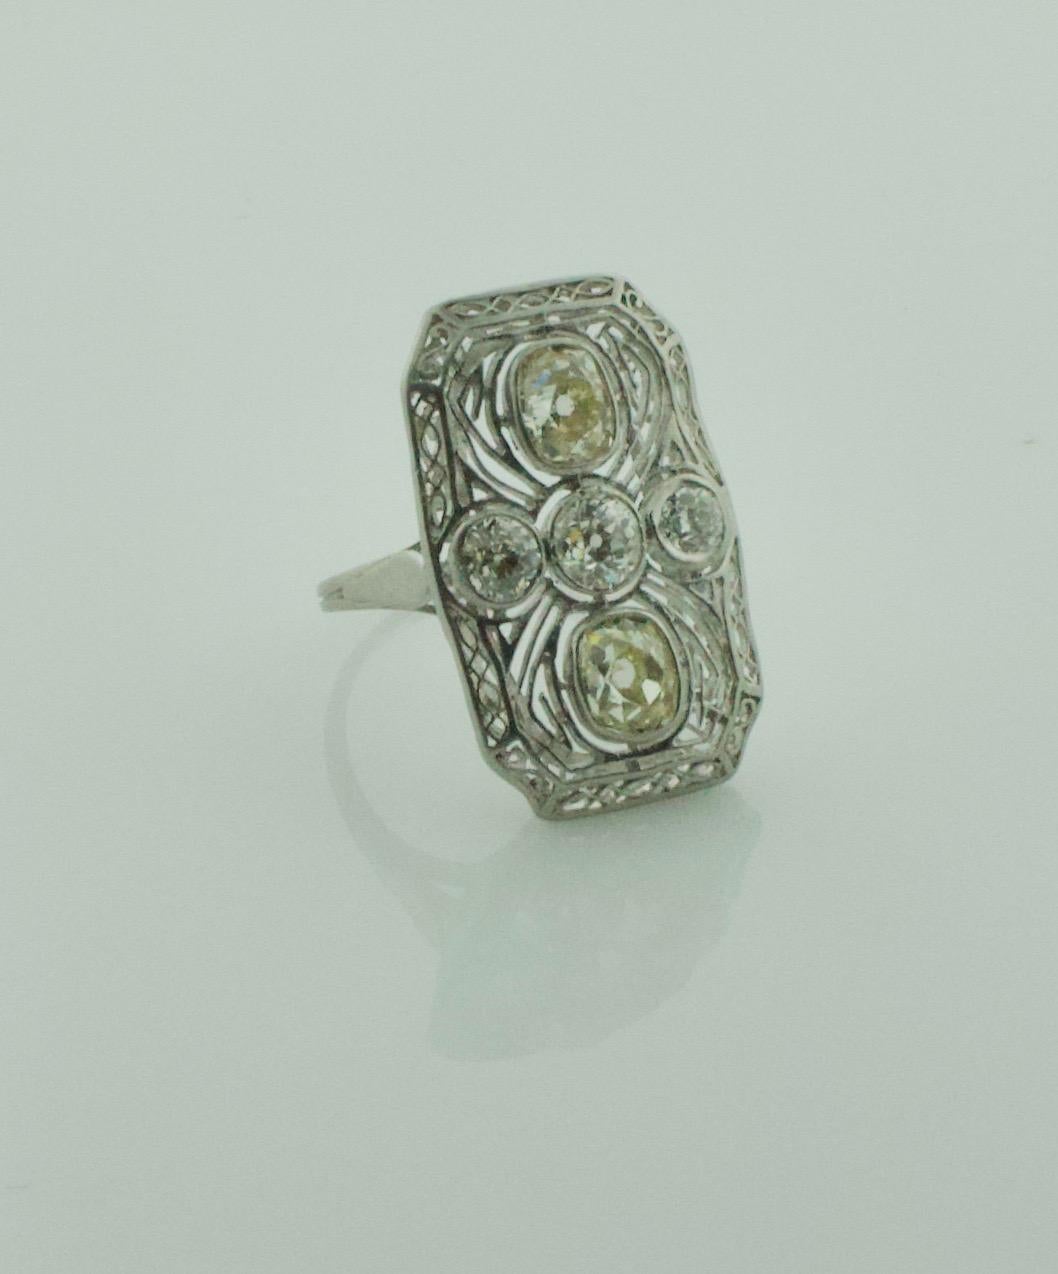 Circa 1920's Diamond Ring in Platinum
Two Old Mine Cut Diamonds weighing 1.10 carats approximately [KL - SI] [bright with no imperfections visible to the naked eye]
Three Old Mine Cut Diamonds weighing .60 carats approximately [GH VS- SI] [bright